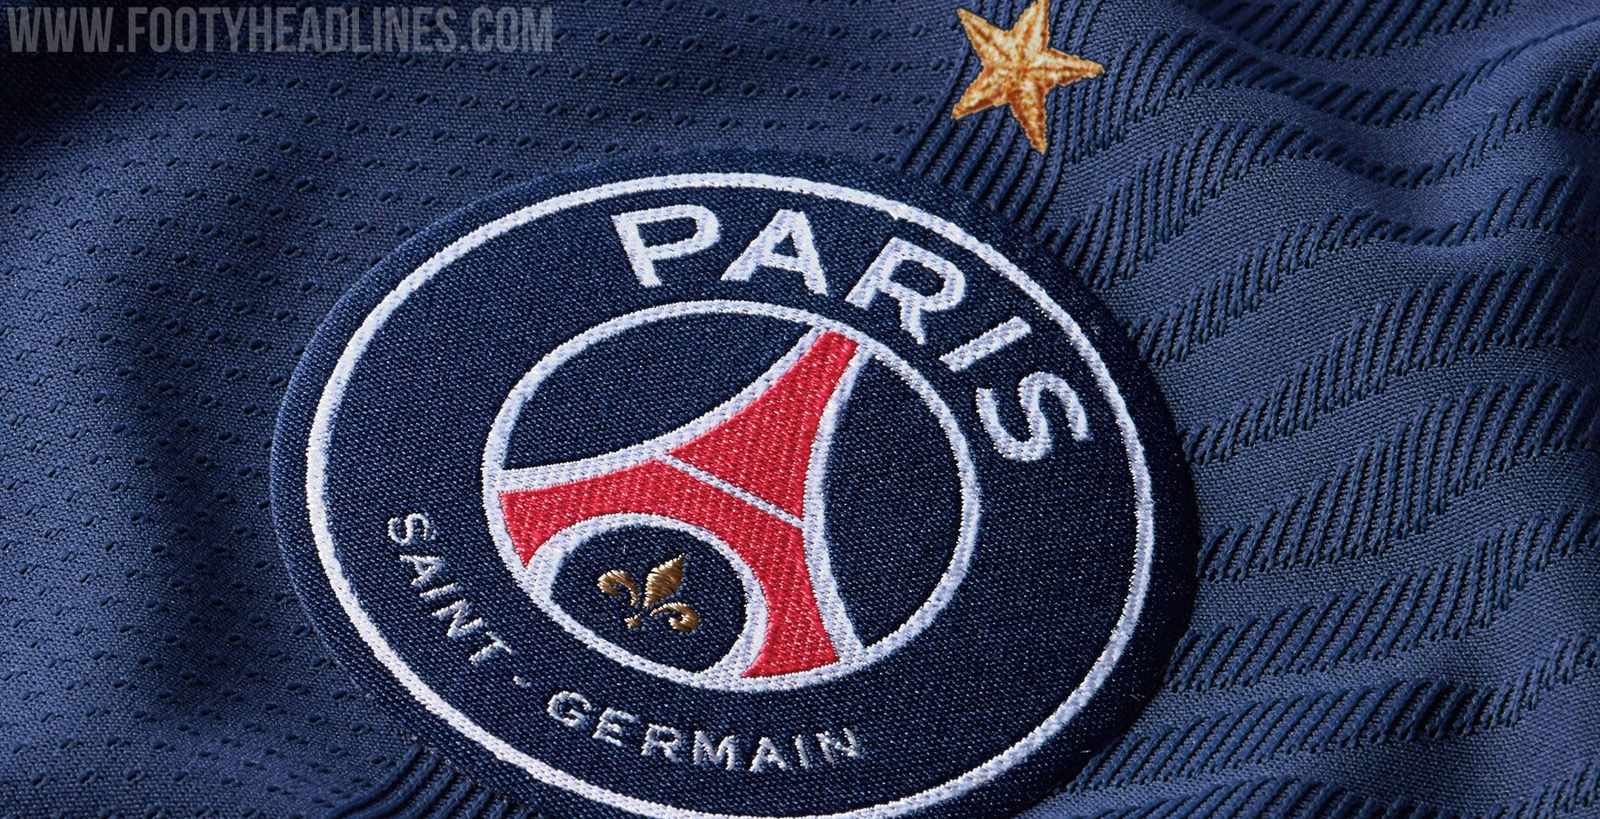 Report: PSG 22-23 Kit to Feature Star - France Stars Kit Rule Explained -  Footy Headlines